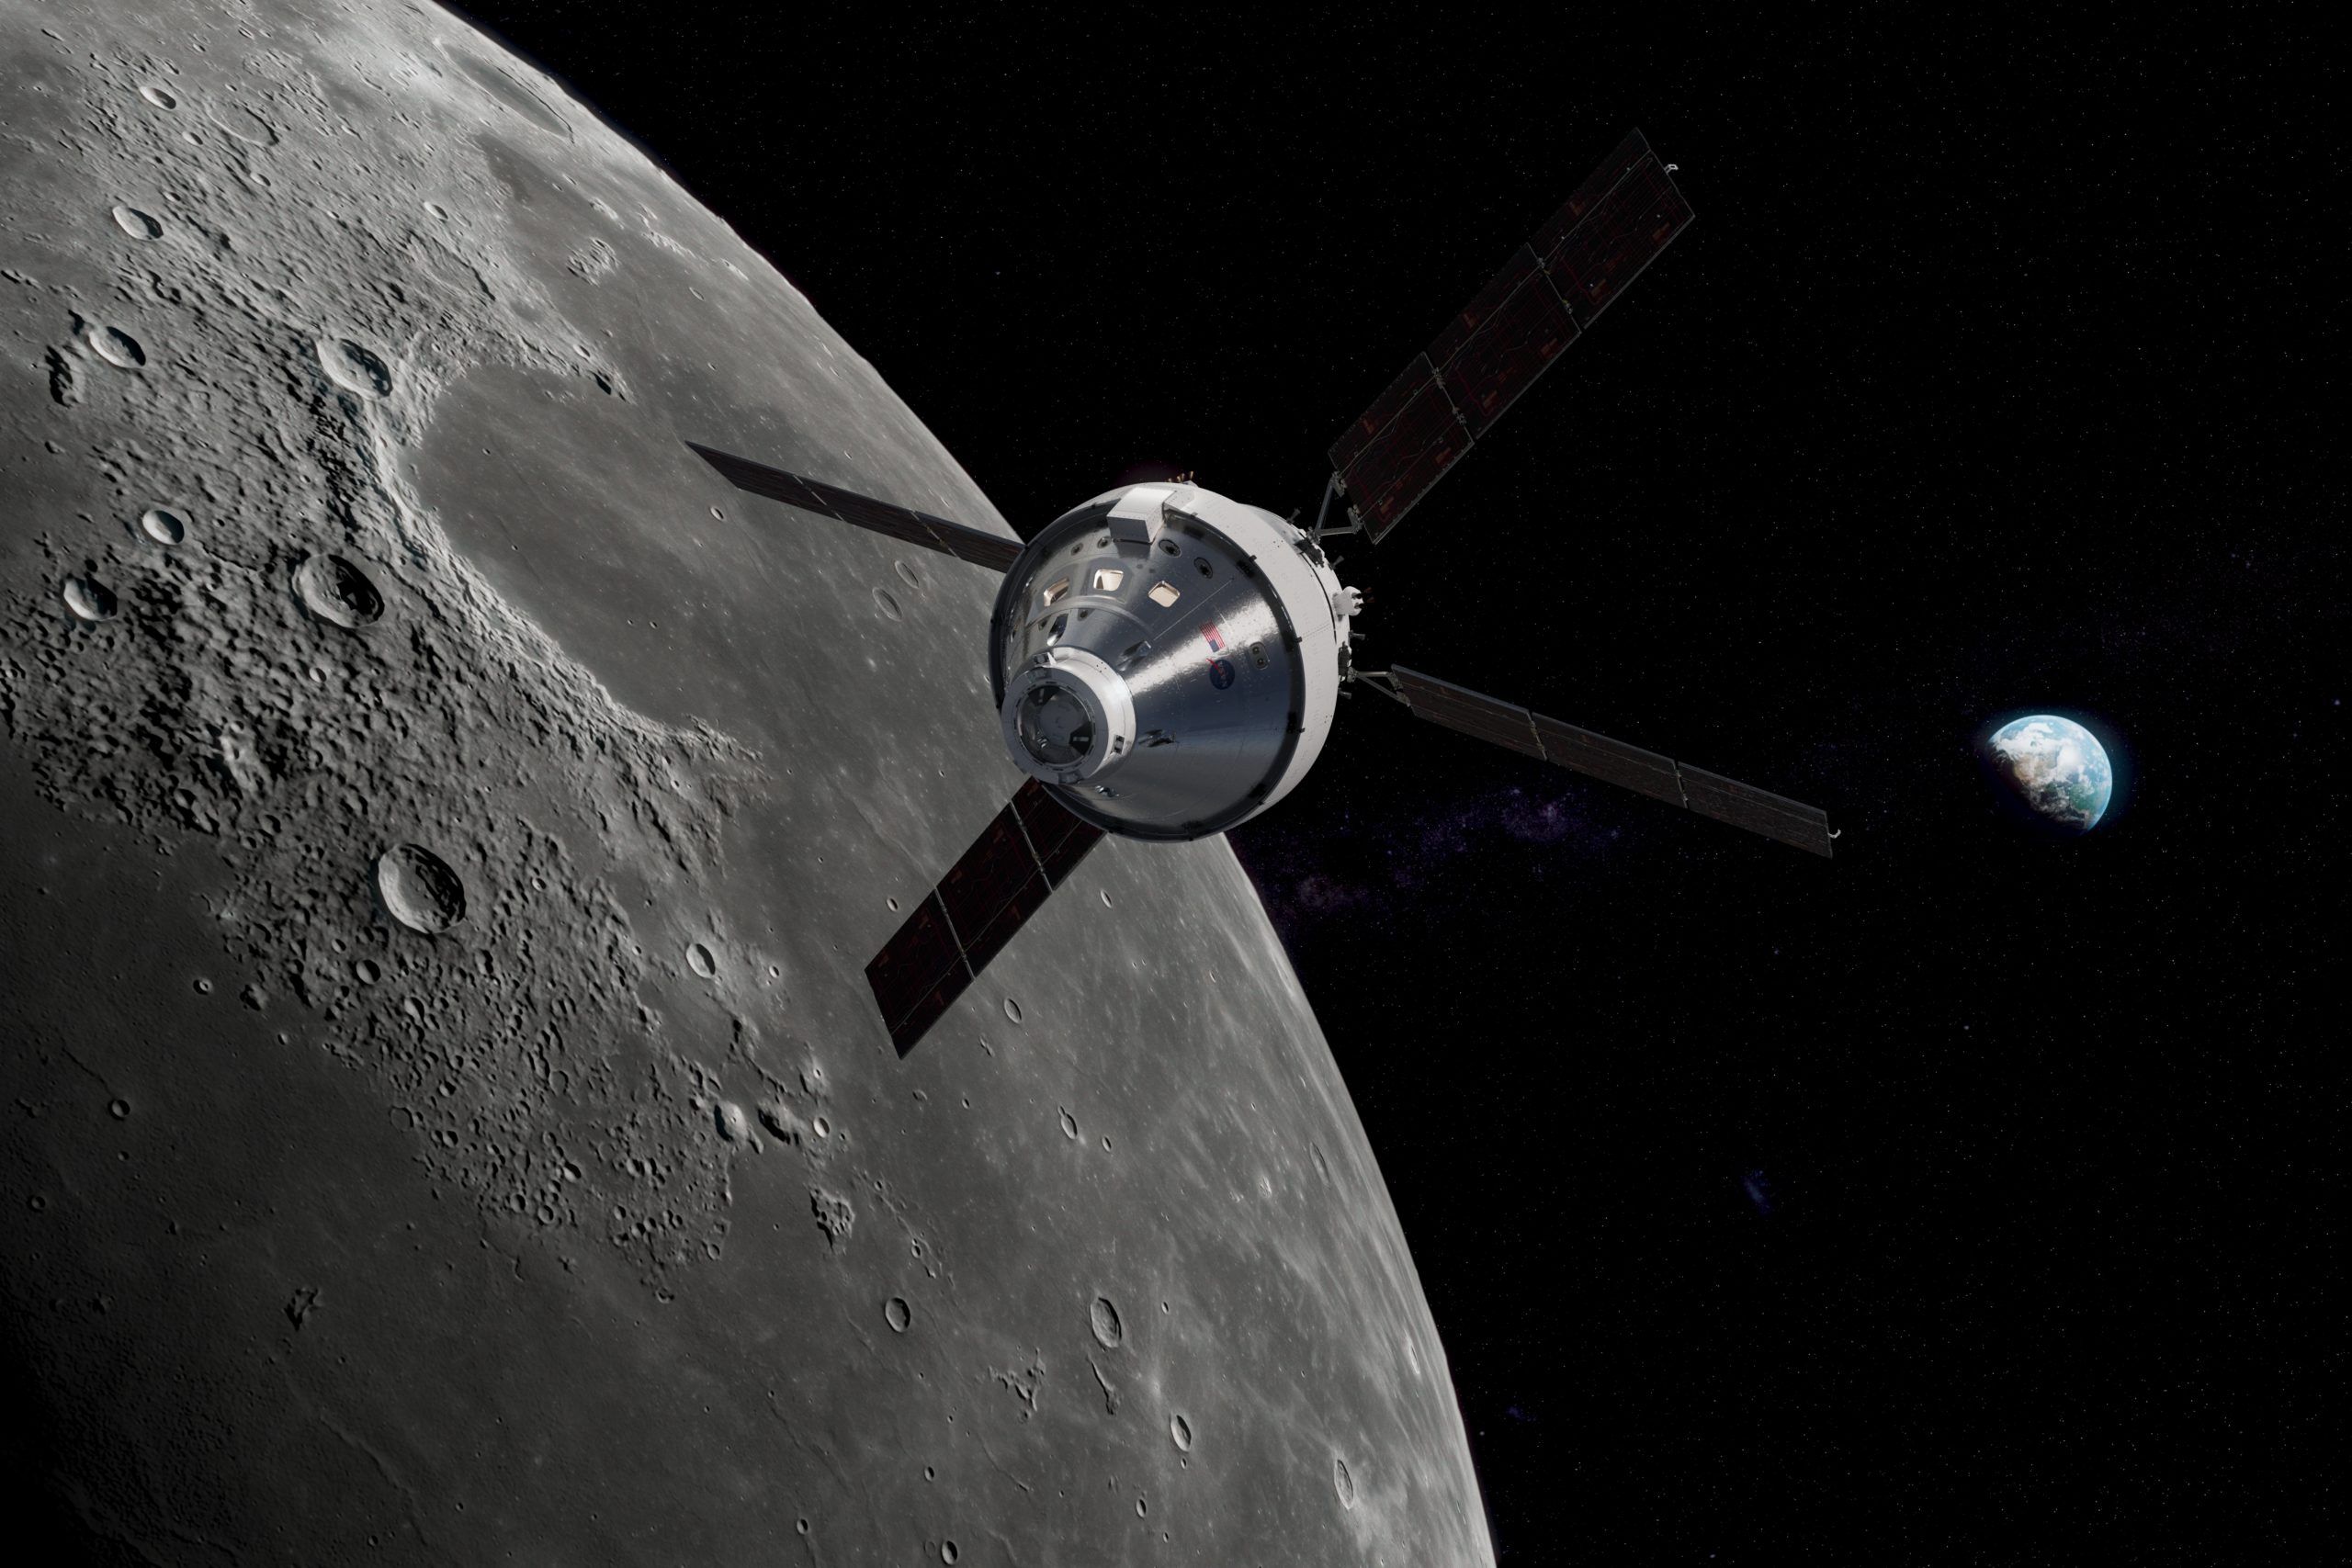 NASA Orion spacecraft orbiting the moon in space